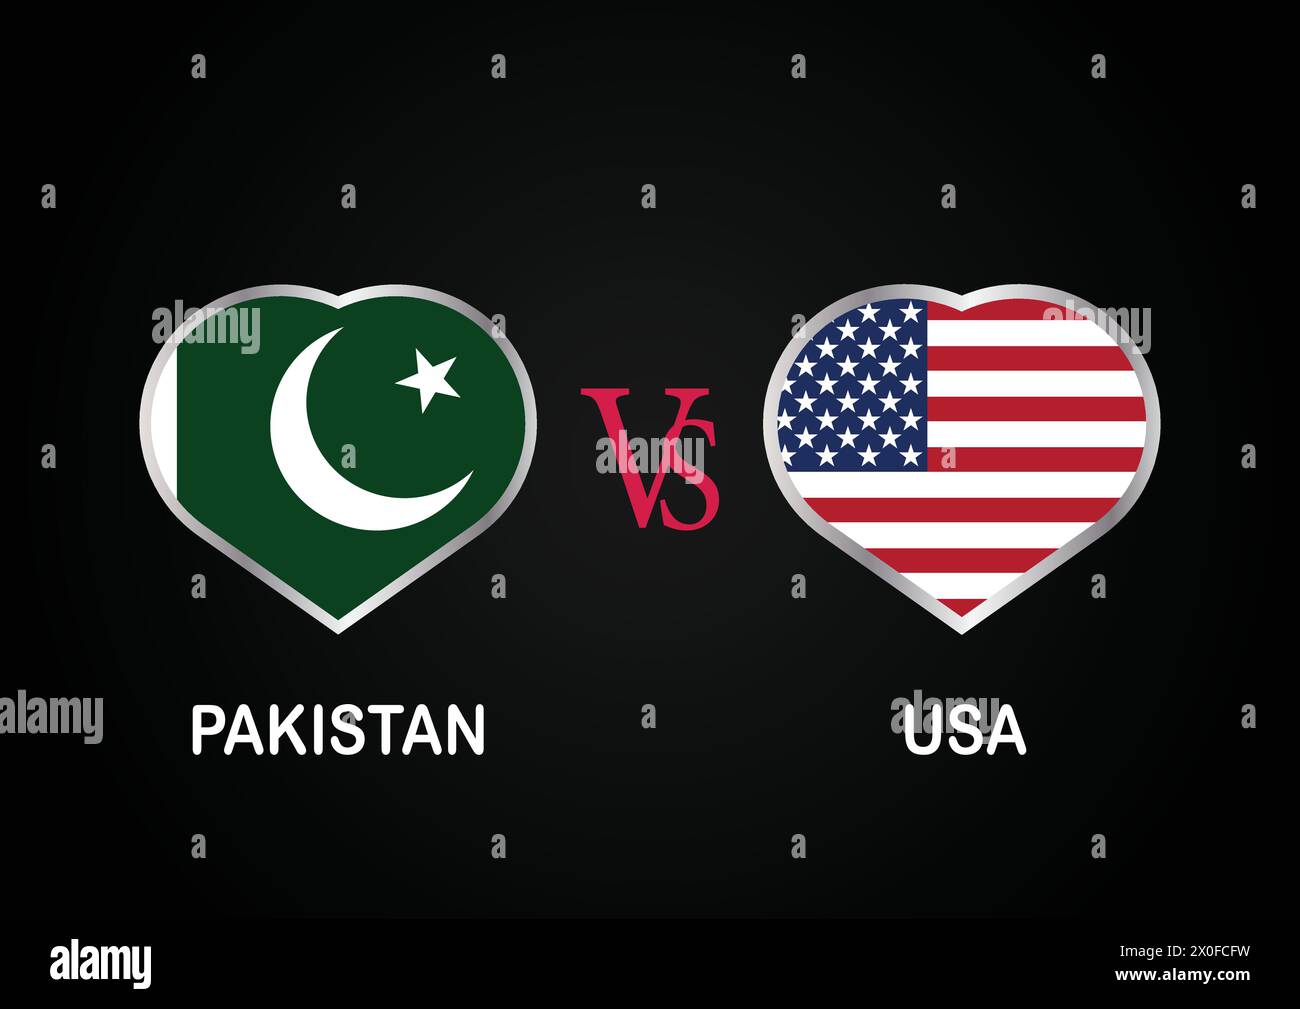 Pakistan Vs USA, Cricket Match concept with creative illustration of participant countries flag Batsman and Hearts isolated on black background Stock Vector